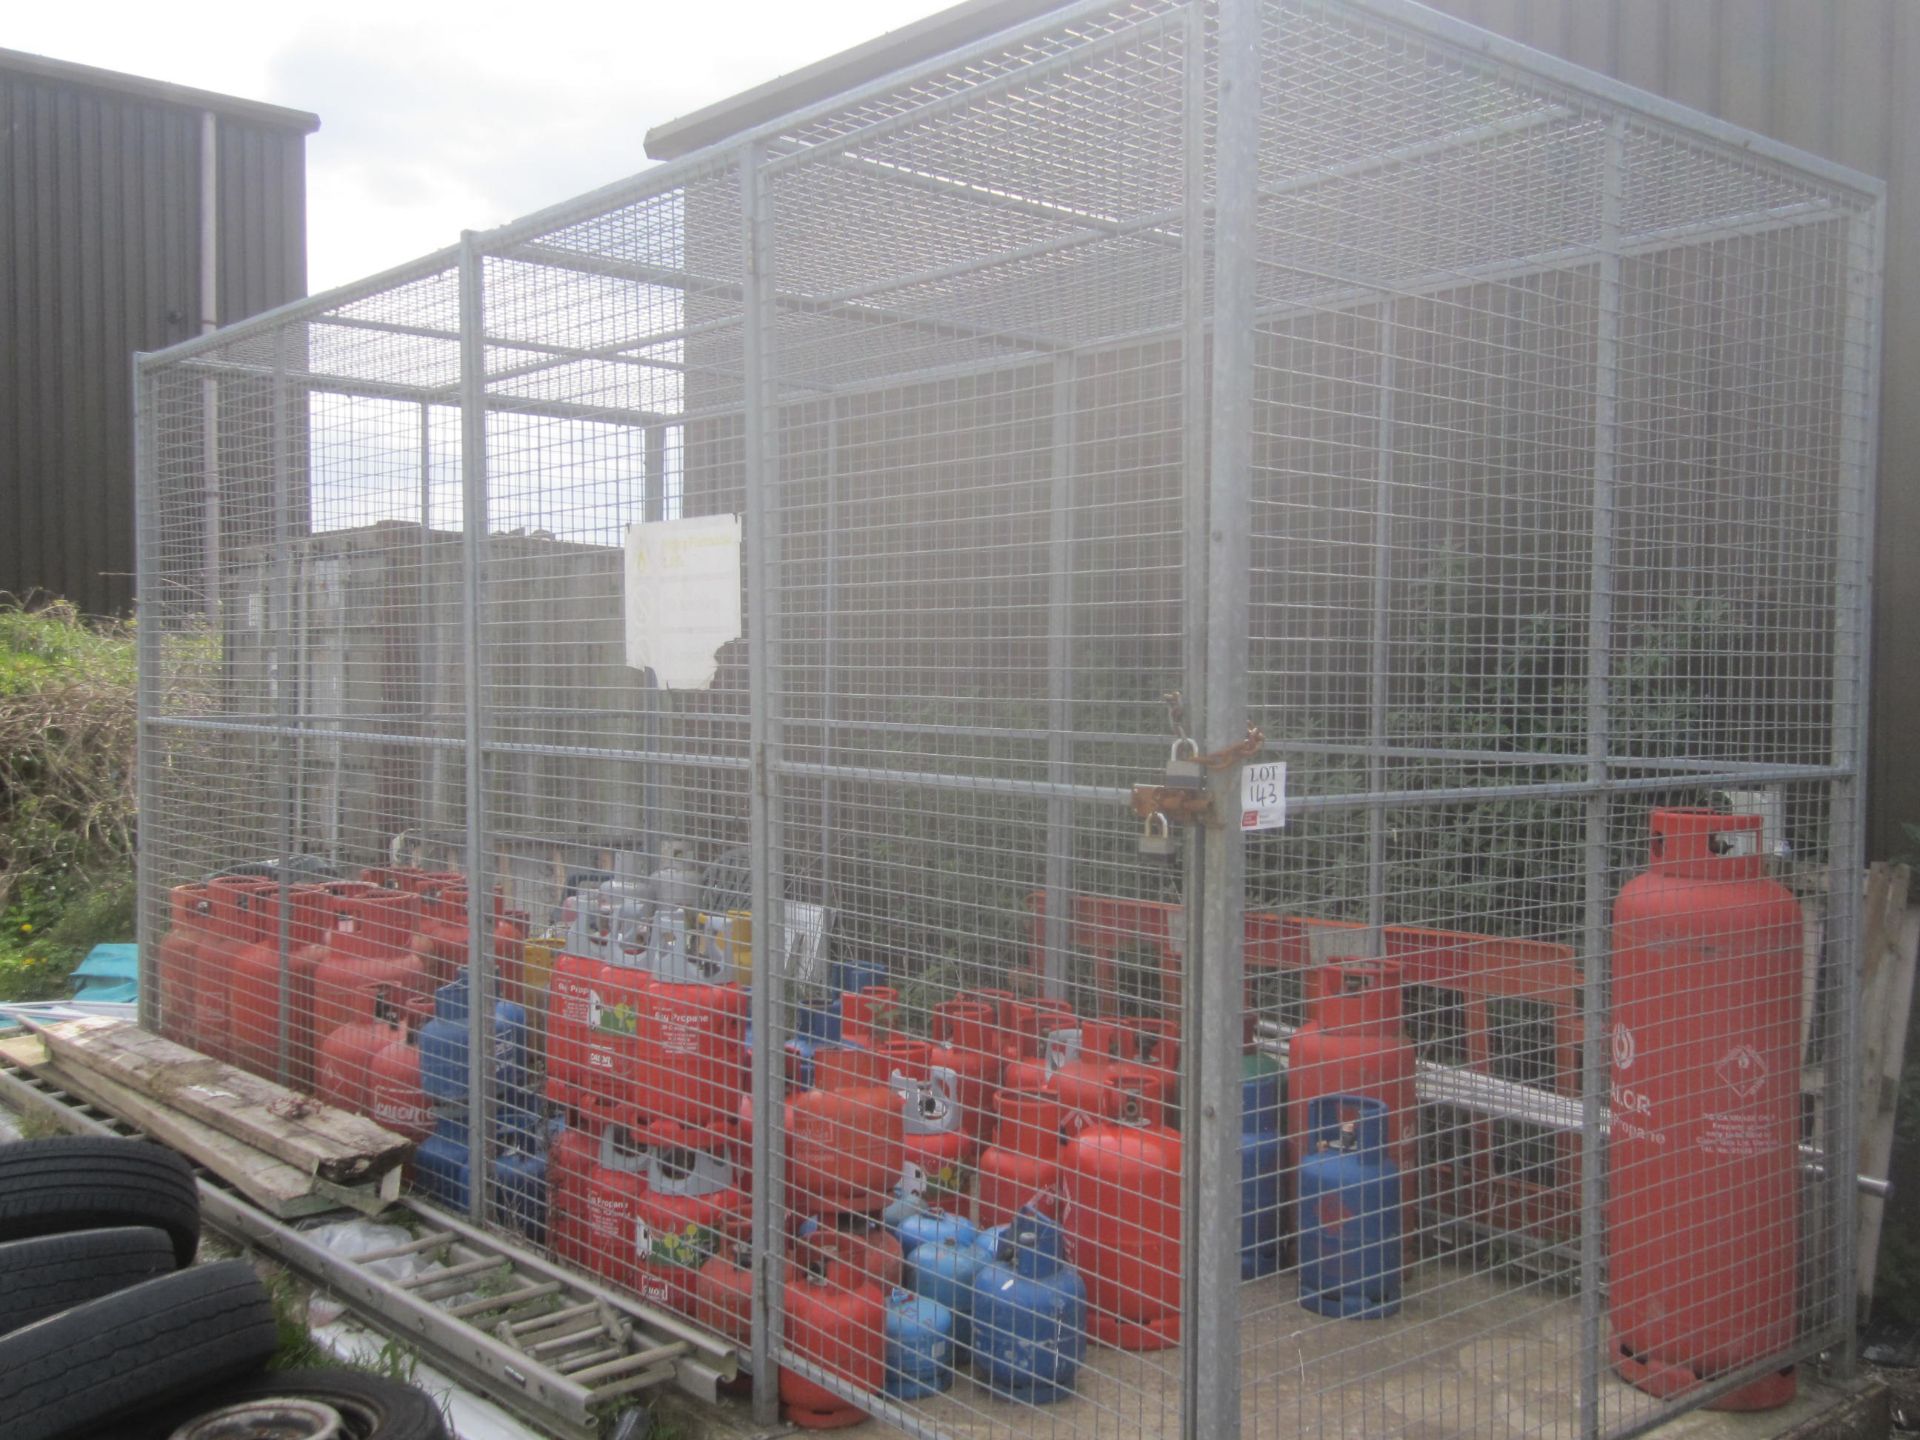 Galvanised steel calor gas bottle netted storage enclosure, panel construction, 16ft x 8ft x 8ft - Image 2 of 3